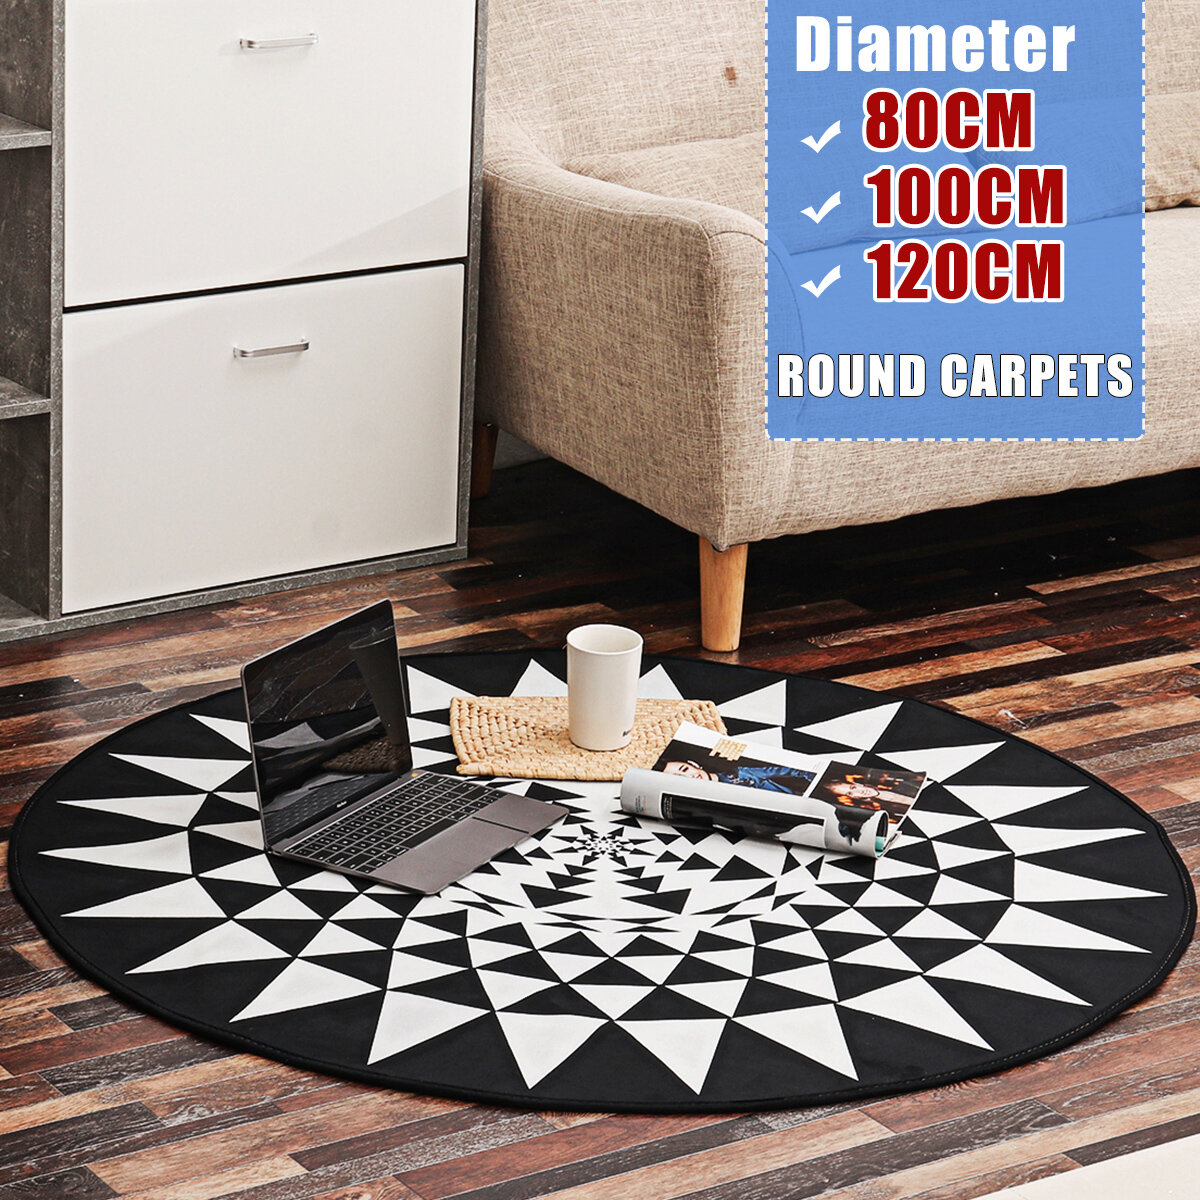 

Round Rugs Floor Carpets Soft to Touch Extra Large Mats